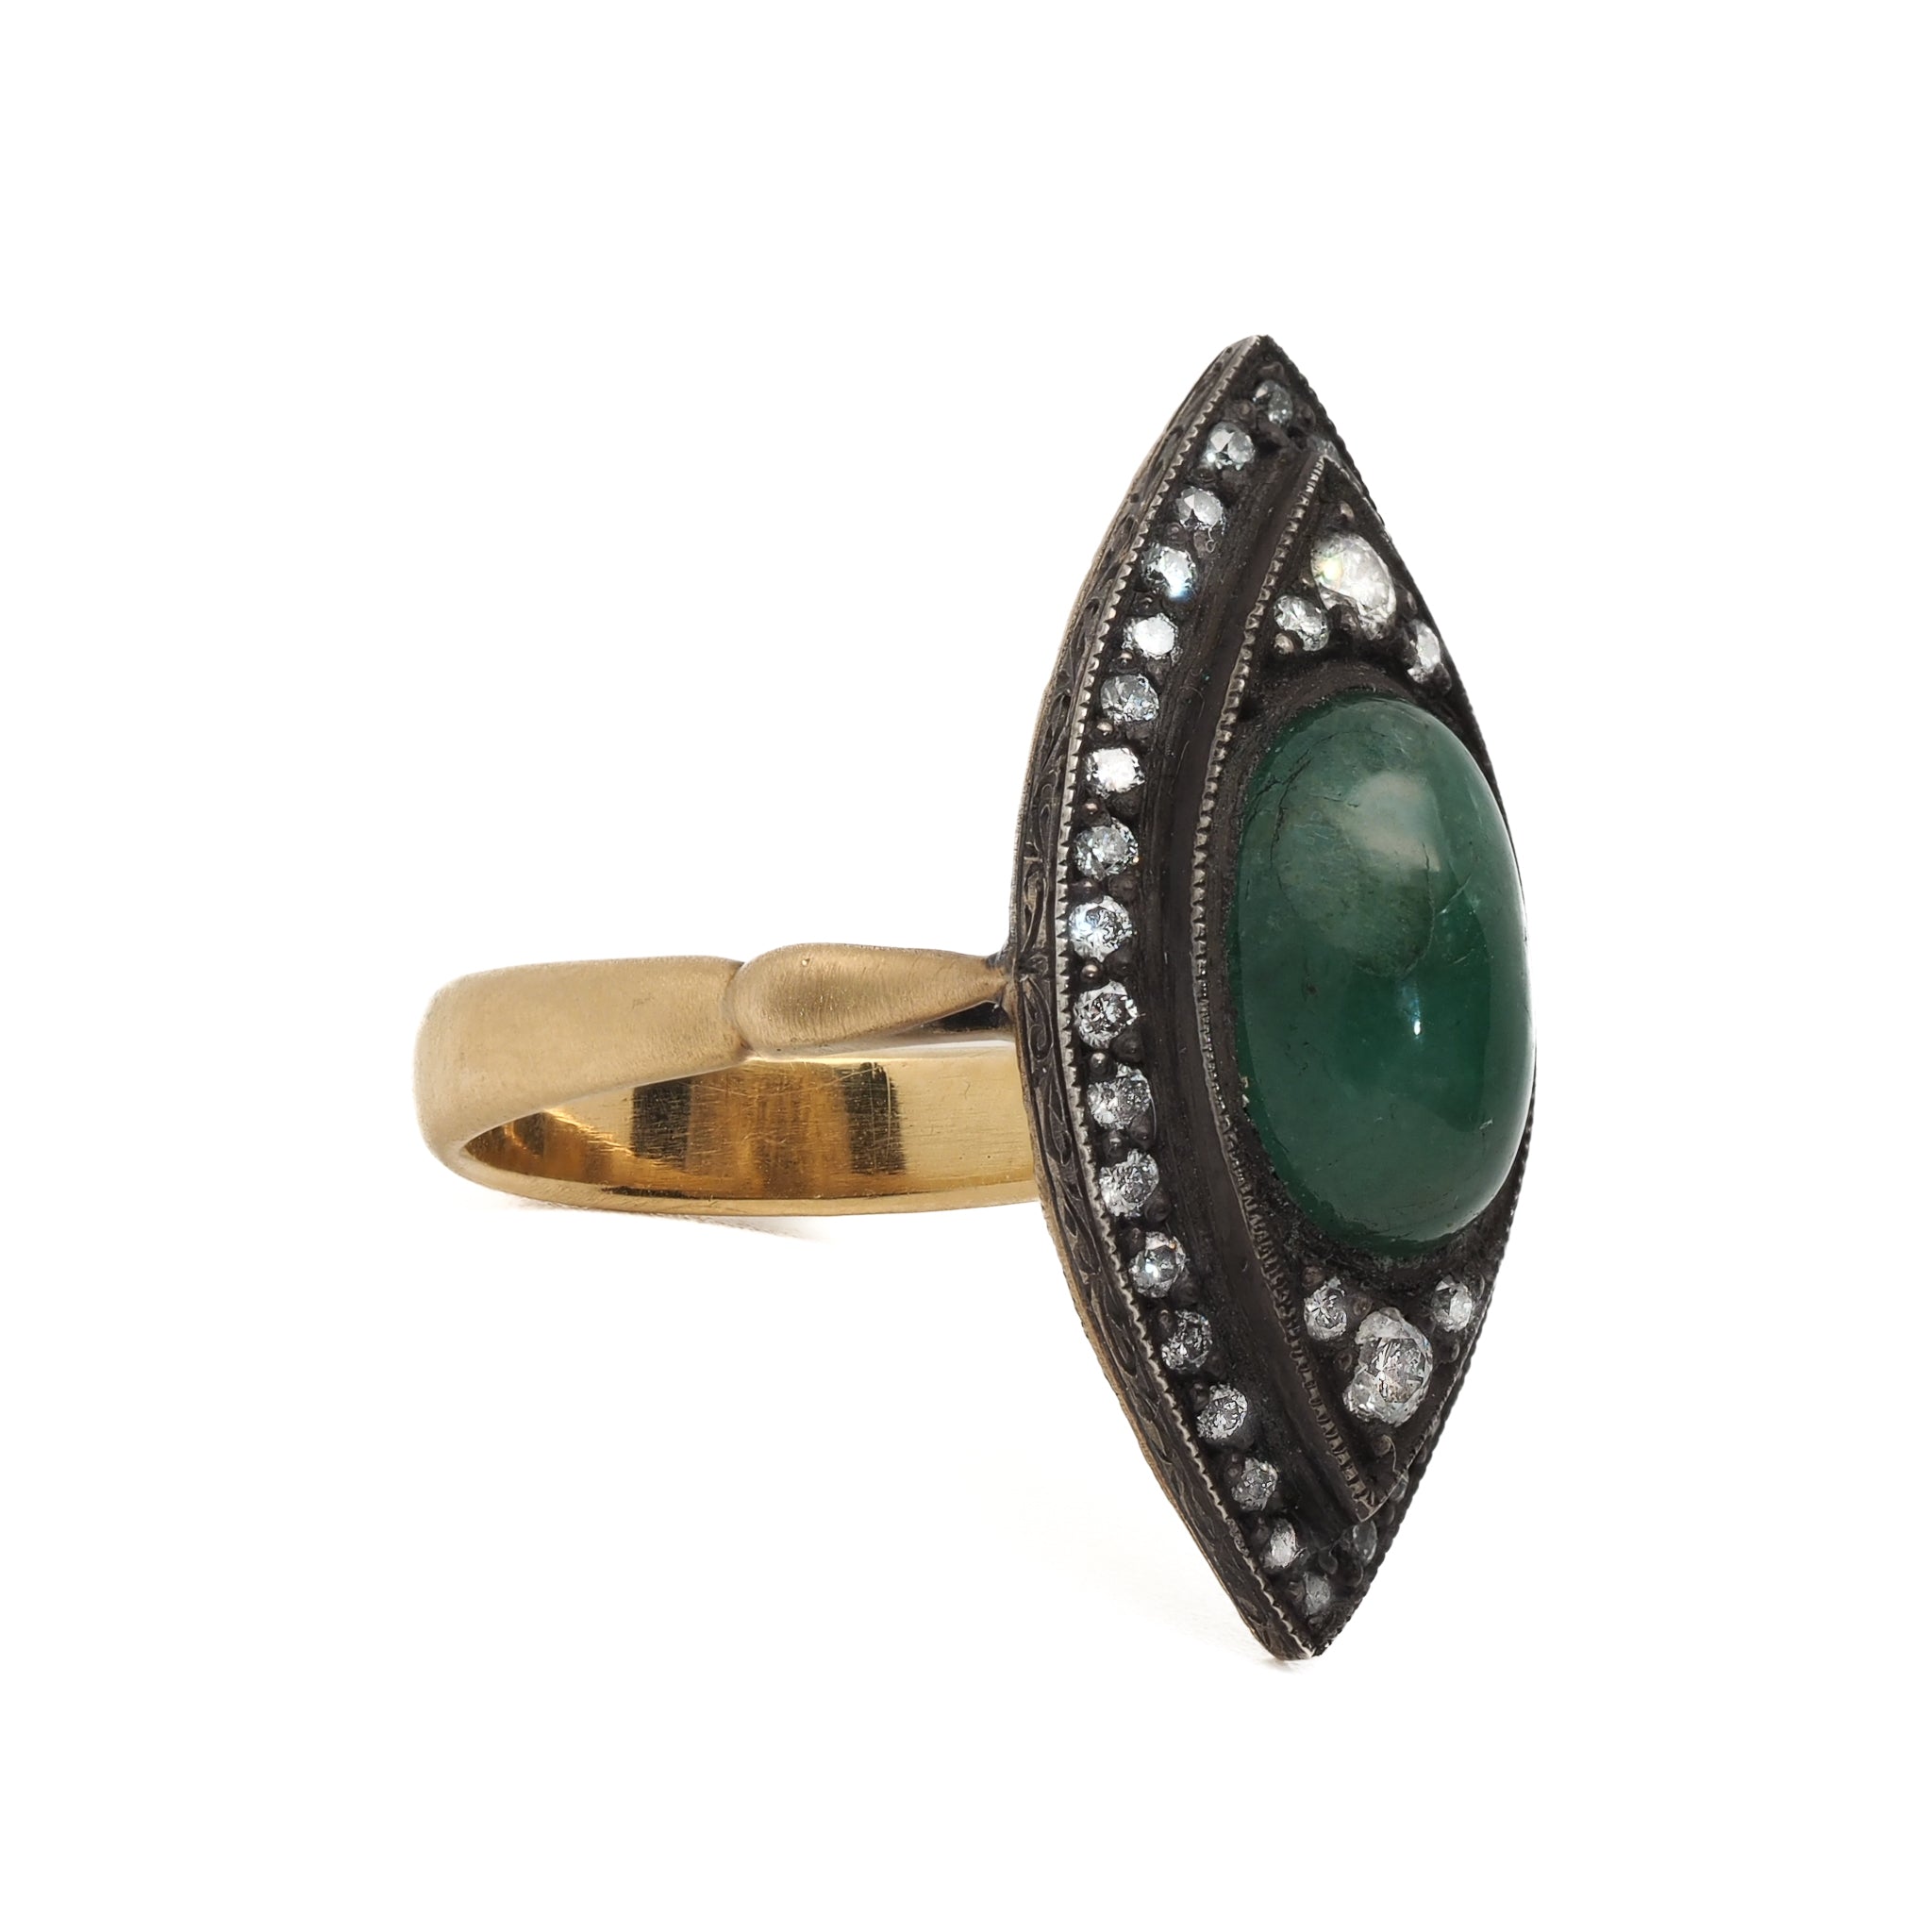 Close-up of the Emerald & Diamond Eye Ring showcasing the vibrant green emerald and the intricate details of the eye-inspired design.